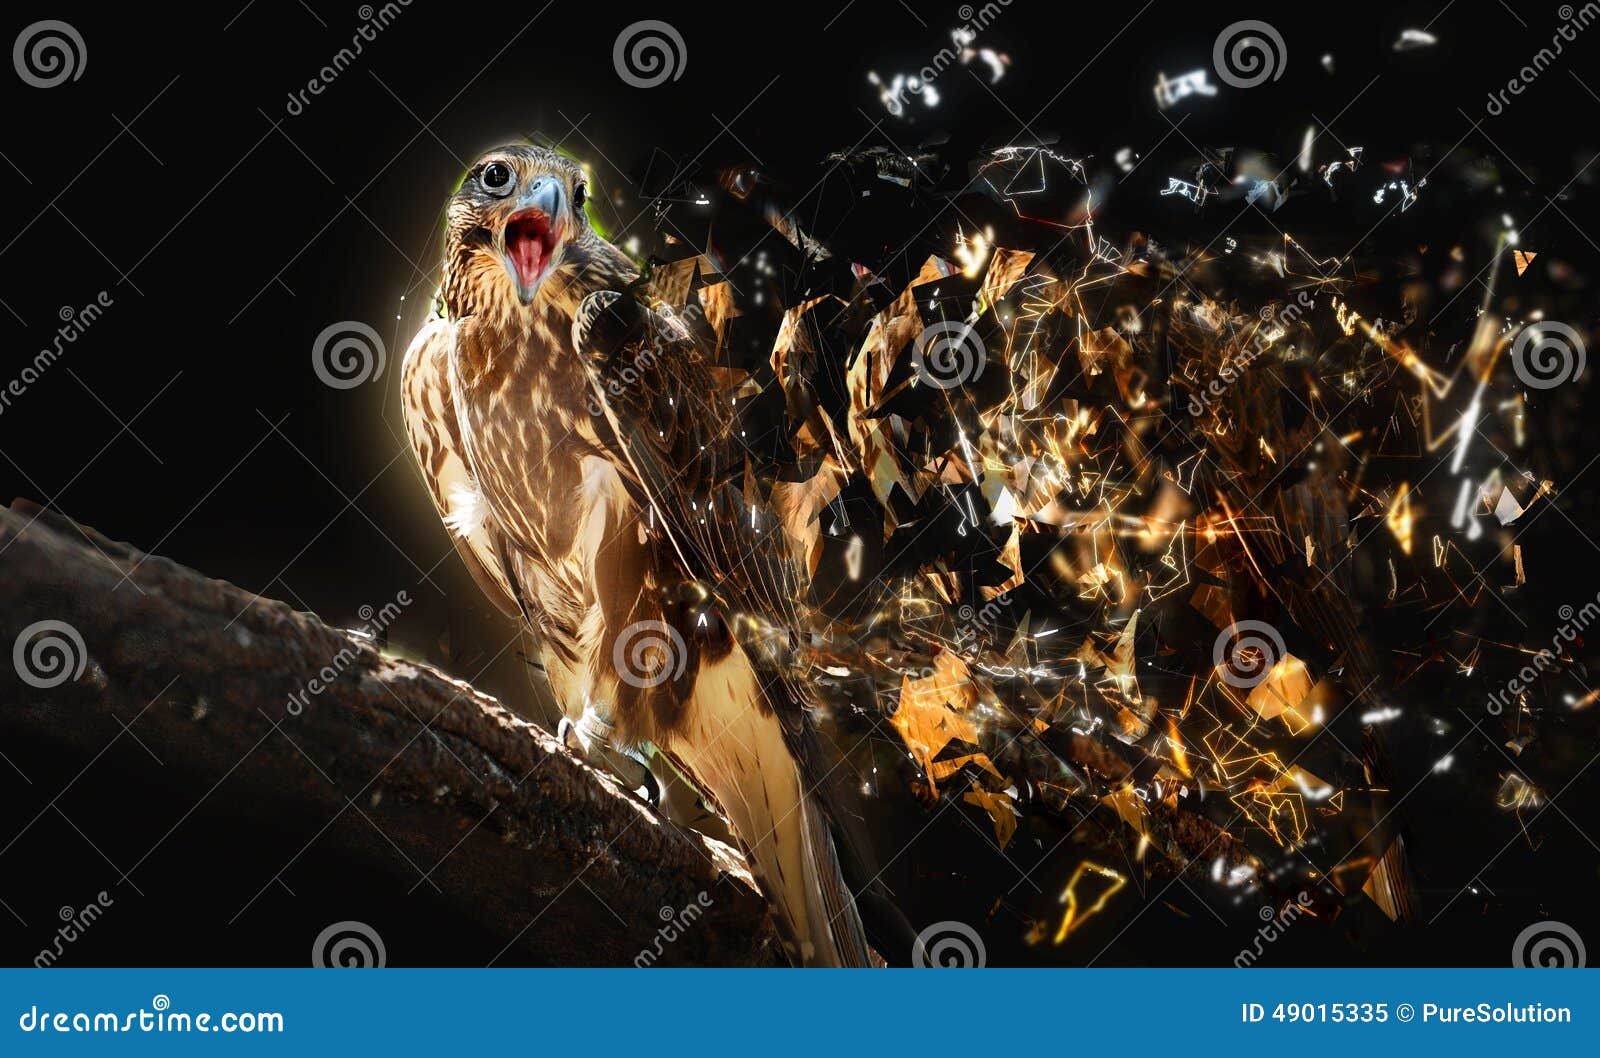 falcon with open beak, abstract animal concept.